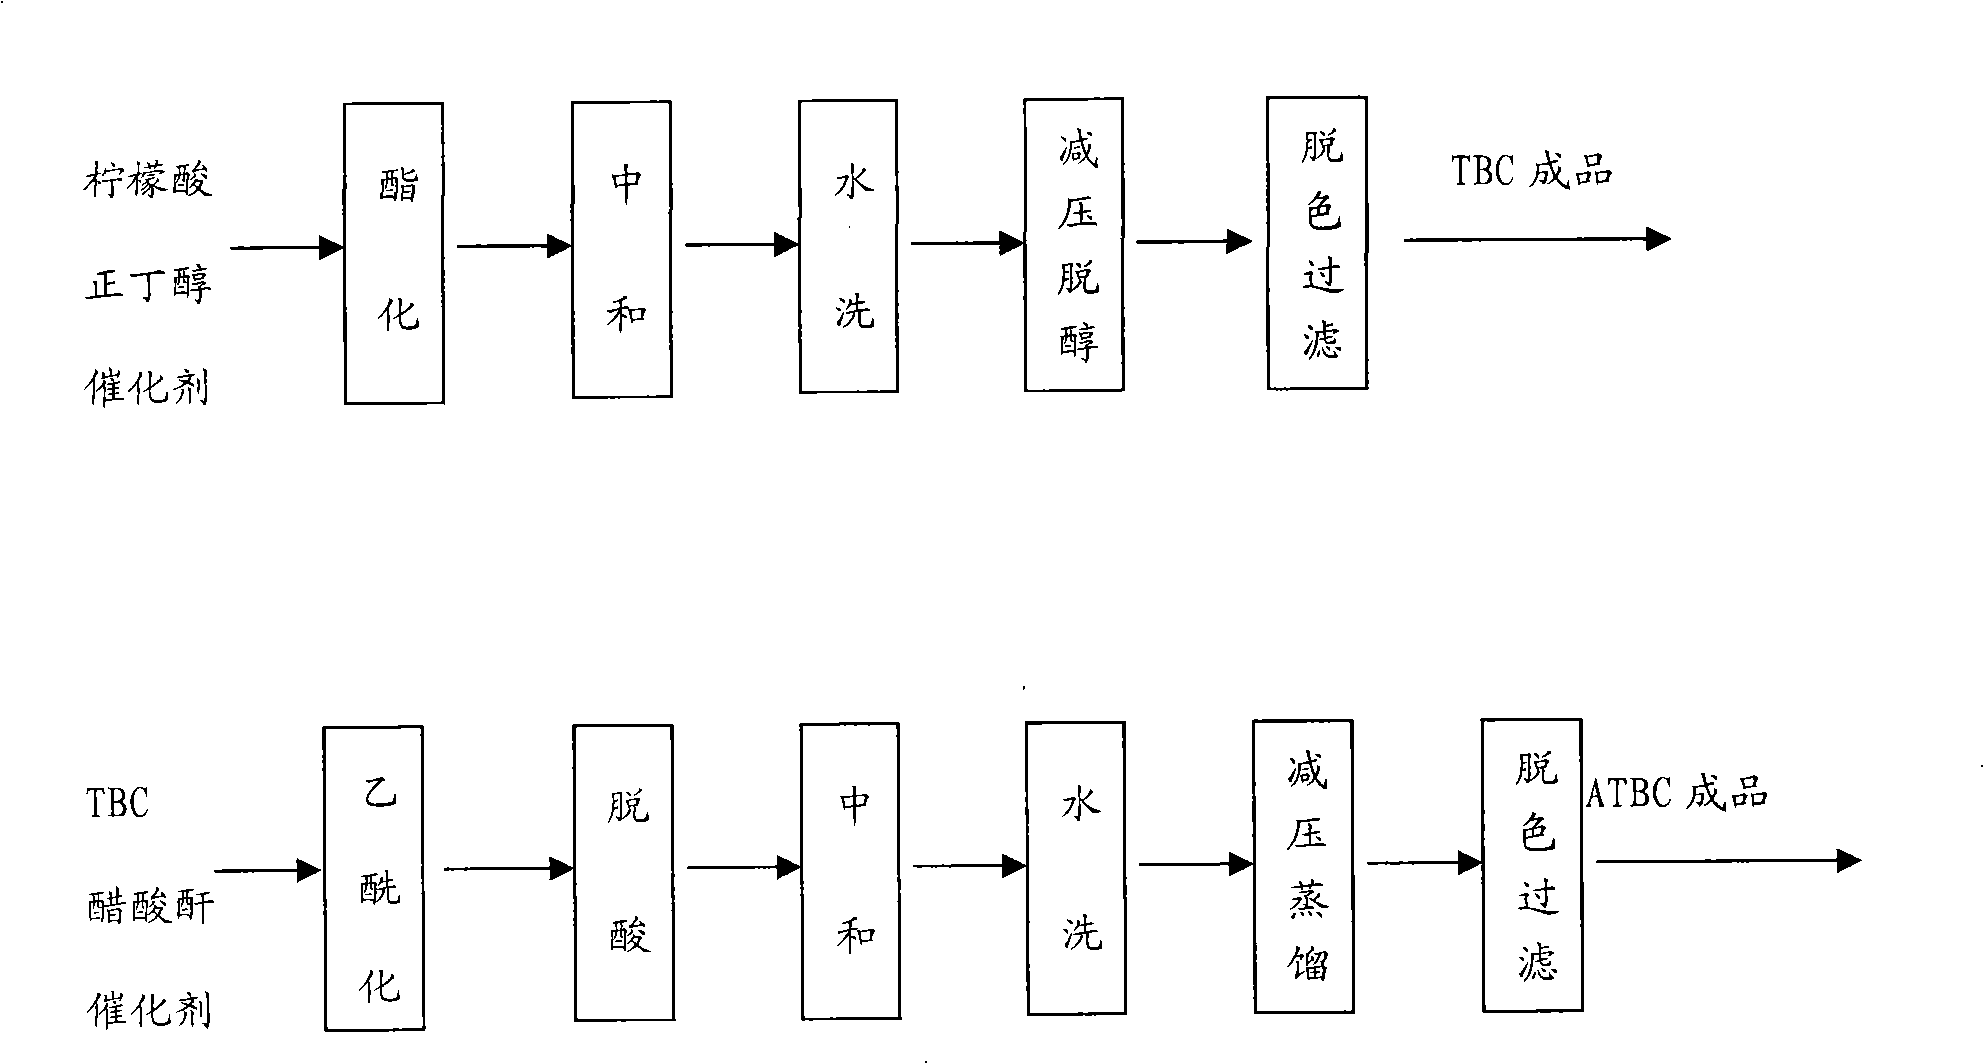 Process for producing acet-tributyl citrate